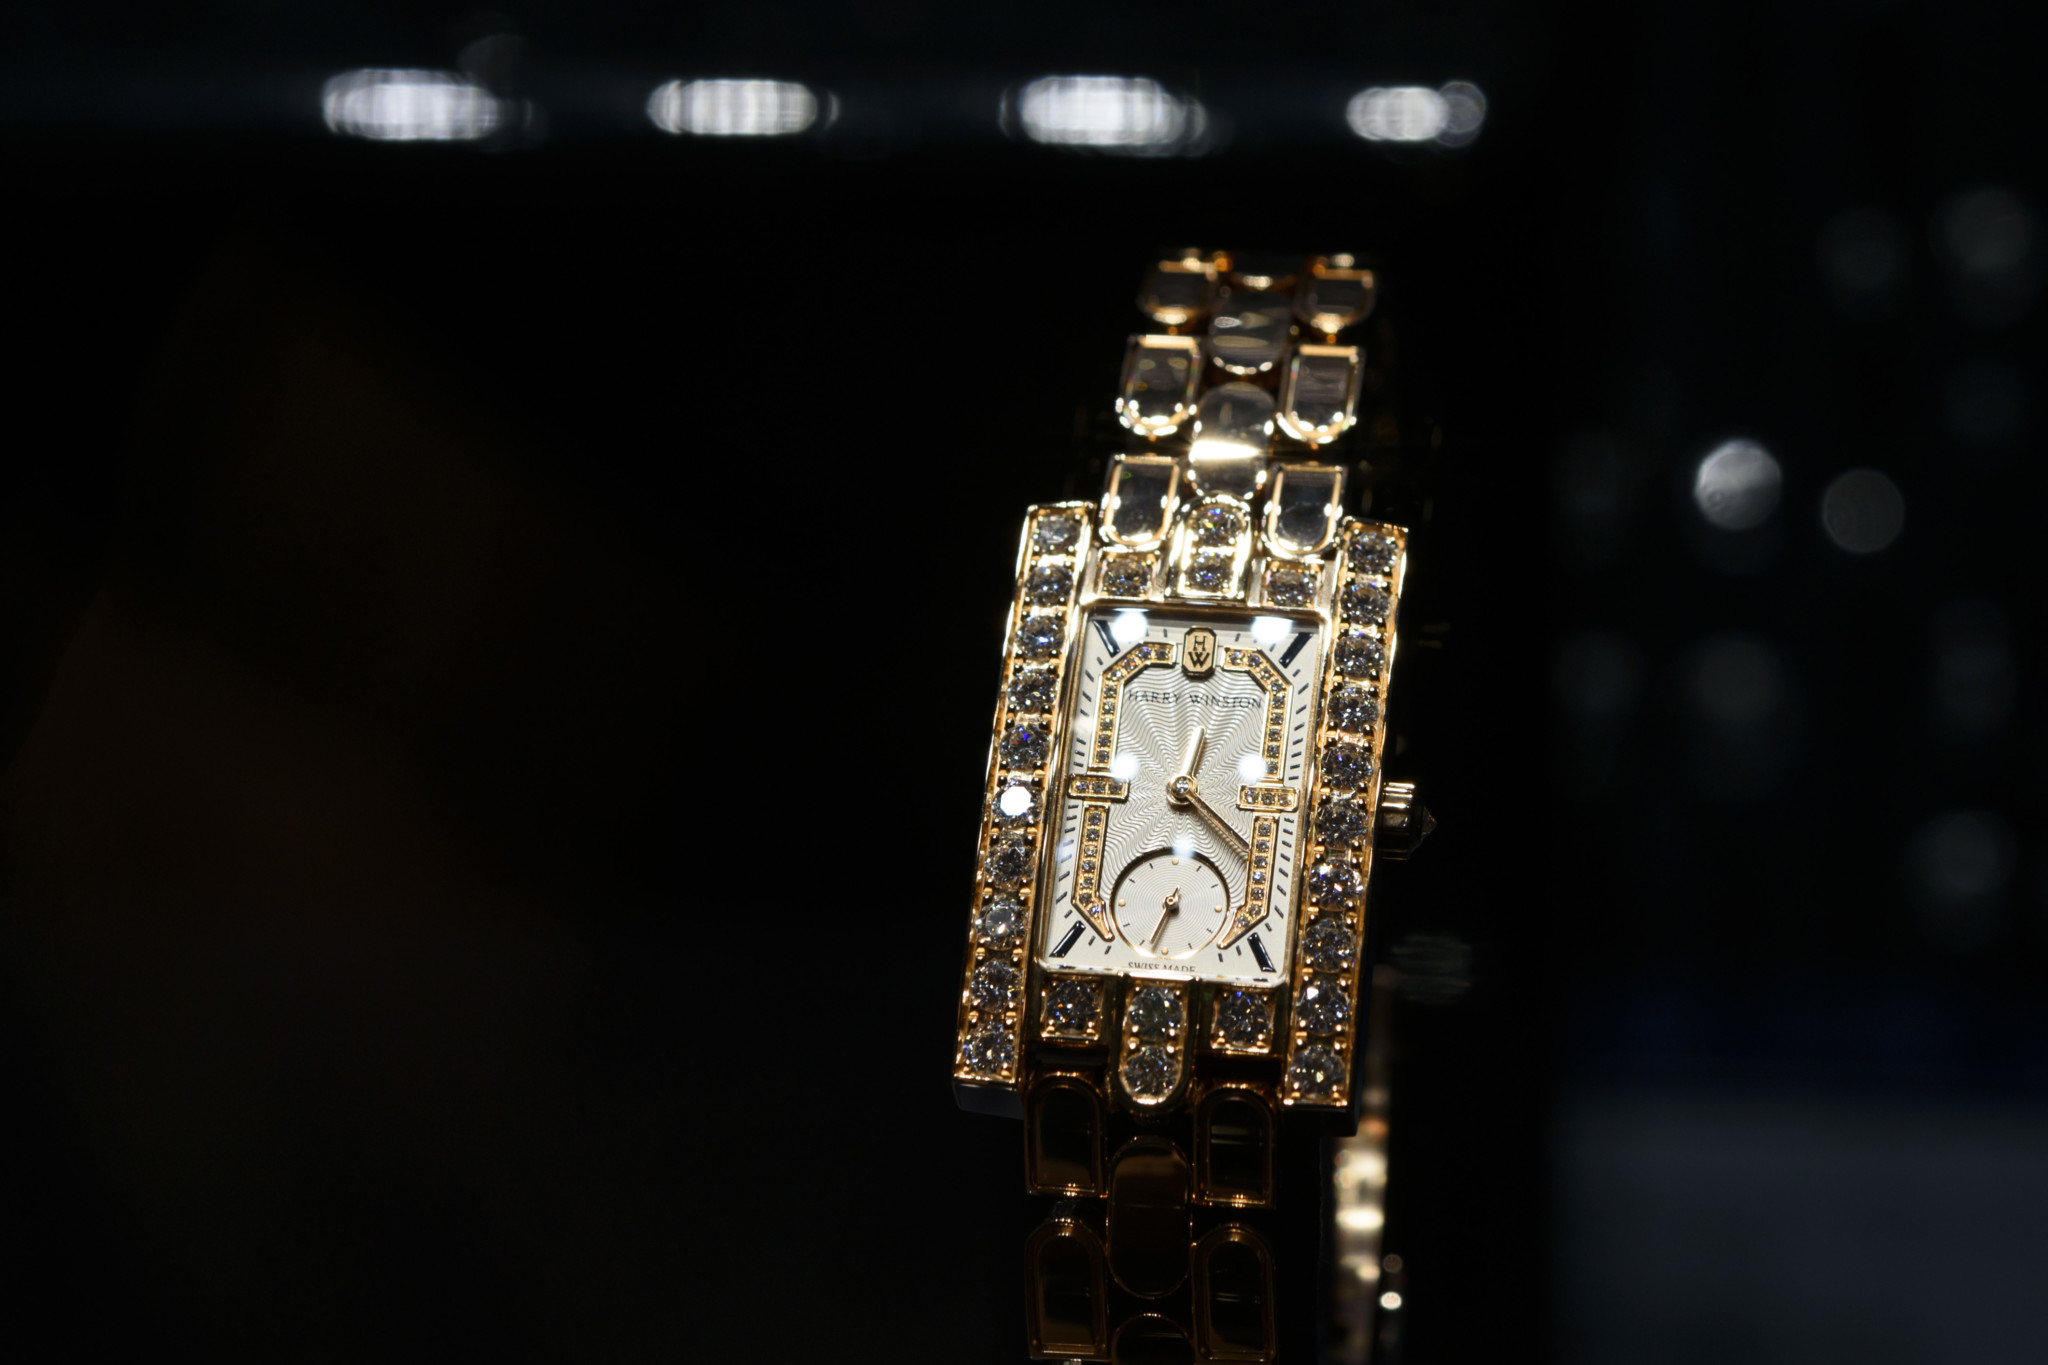 PICTURE SPECIAL: Scenes From Basel As Watch Brands Get Ready To Do Business